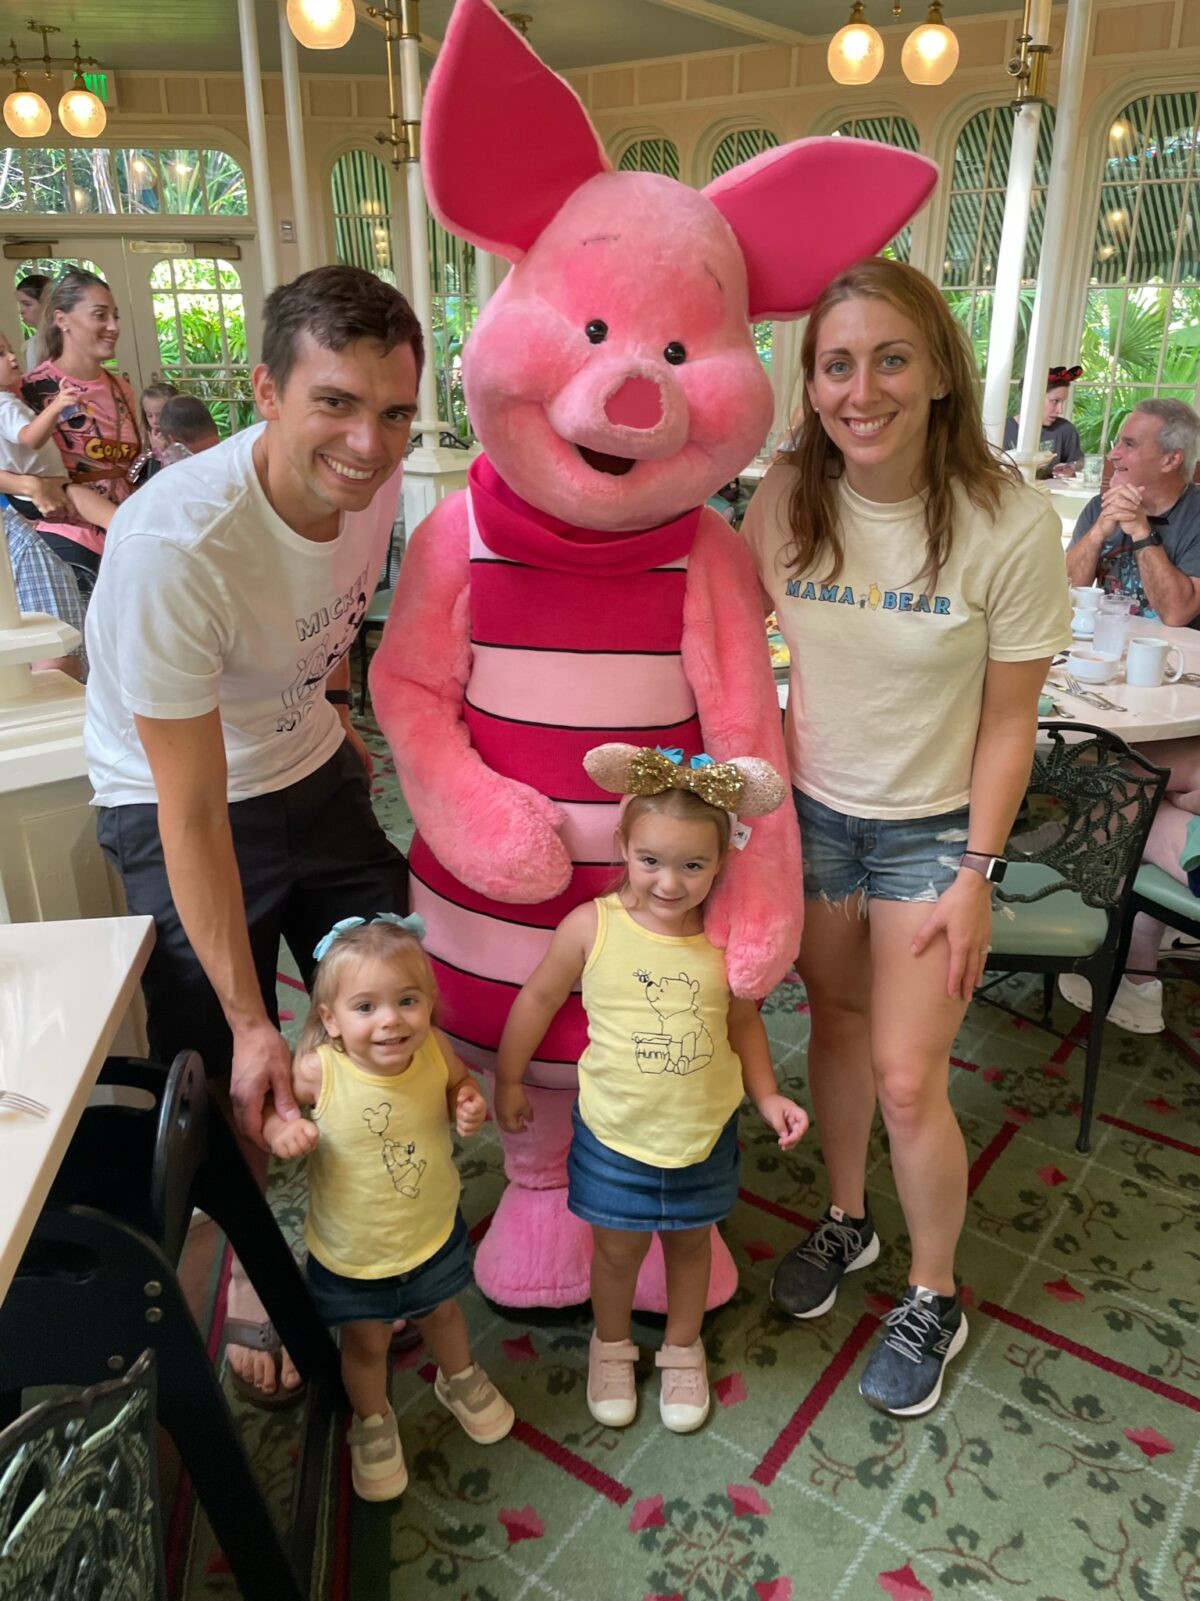 Piglet with husband and wife and two young daughters at character breatfast at Disney World